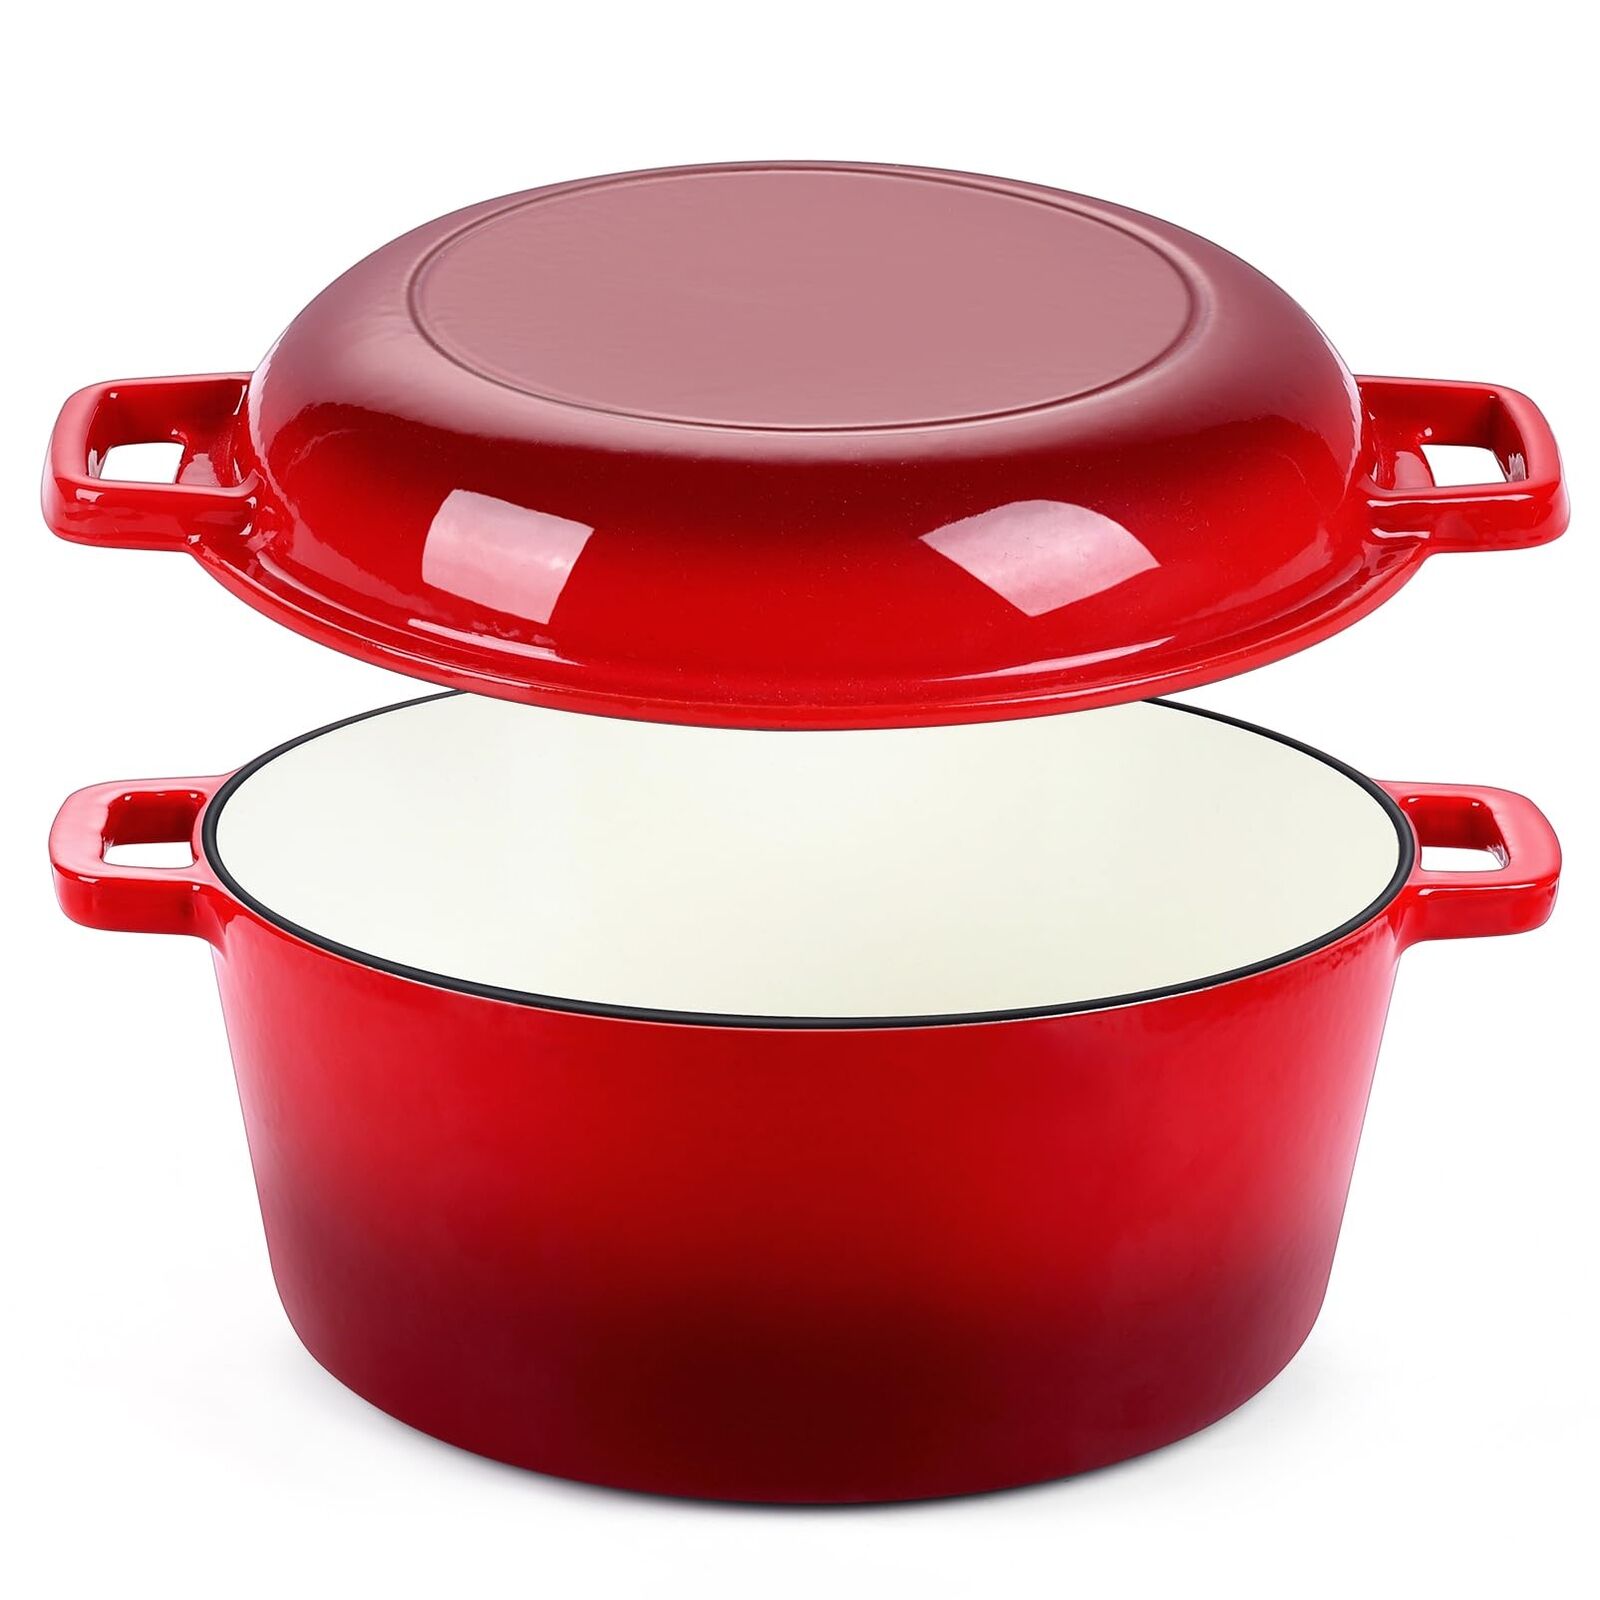 Red Enameled Dutch Oven Pot for Bread Baking  2 in 1 round 5Qt Cast Iron Dutch